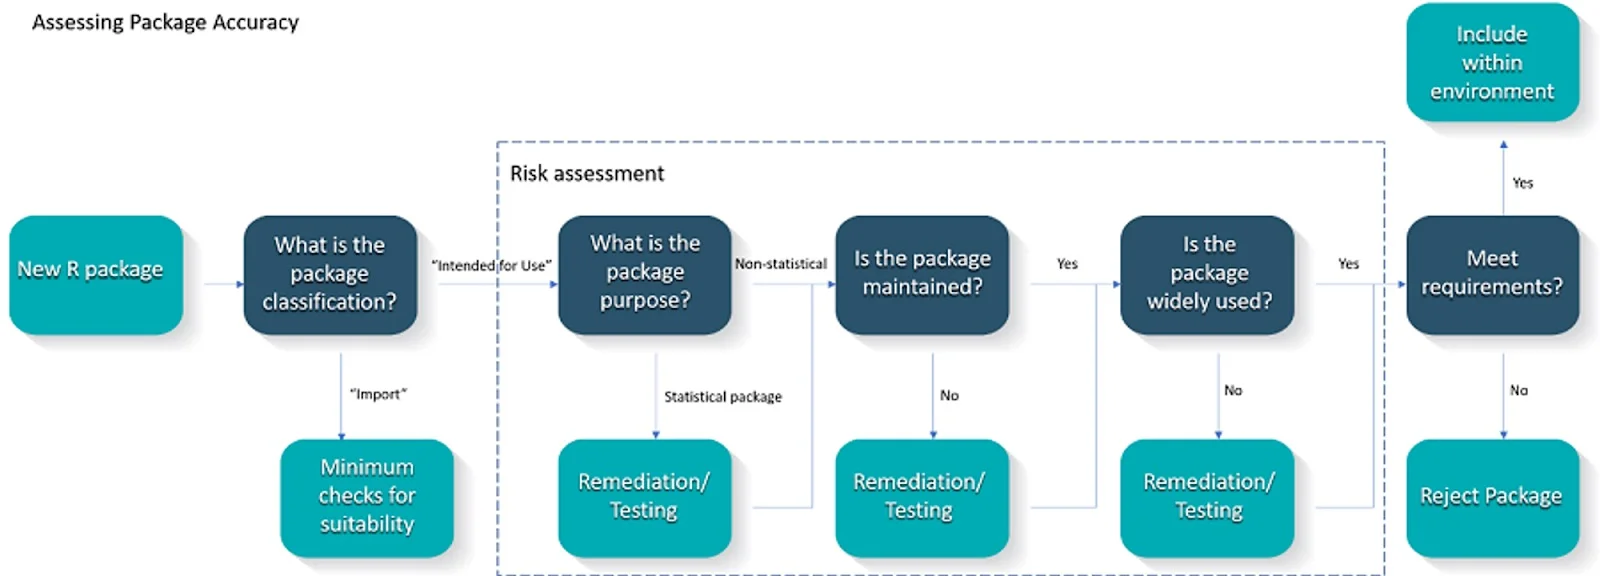 Flowchart for assessing R package accuracy with decision points including package classification, purpose, maintenance status, usage, and meeting requirements for inclusion within an environment.